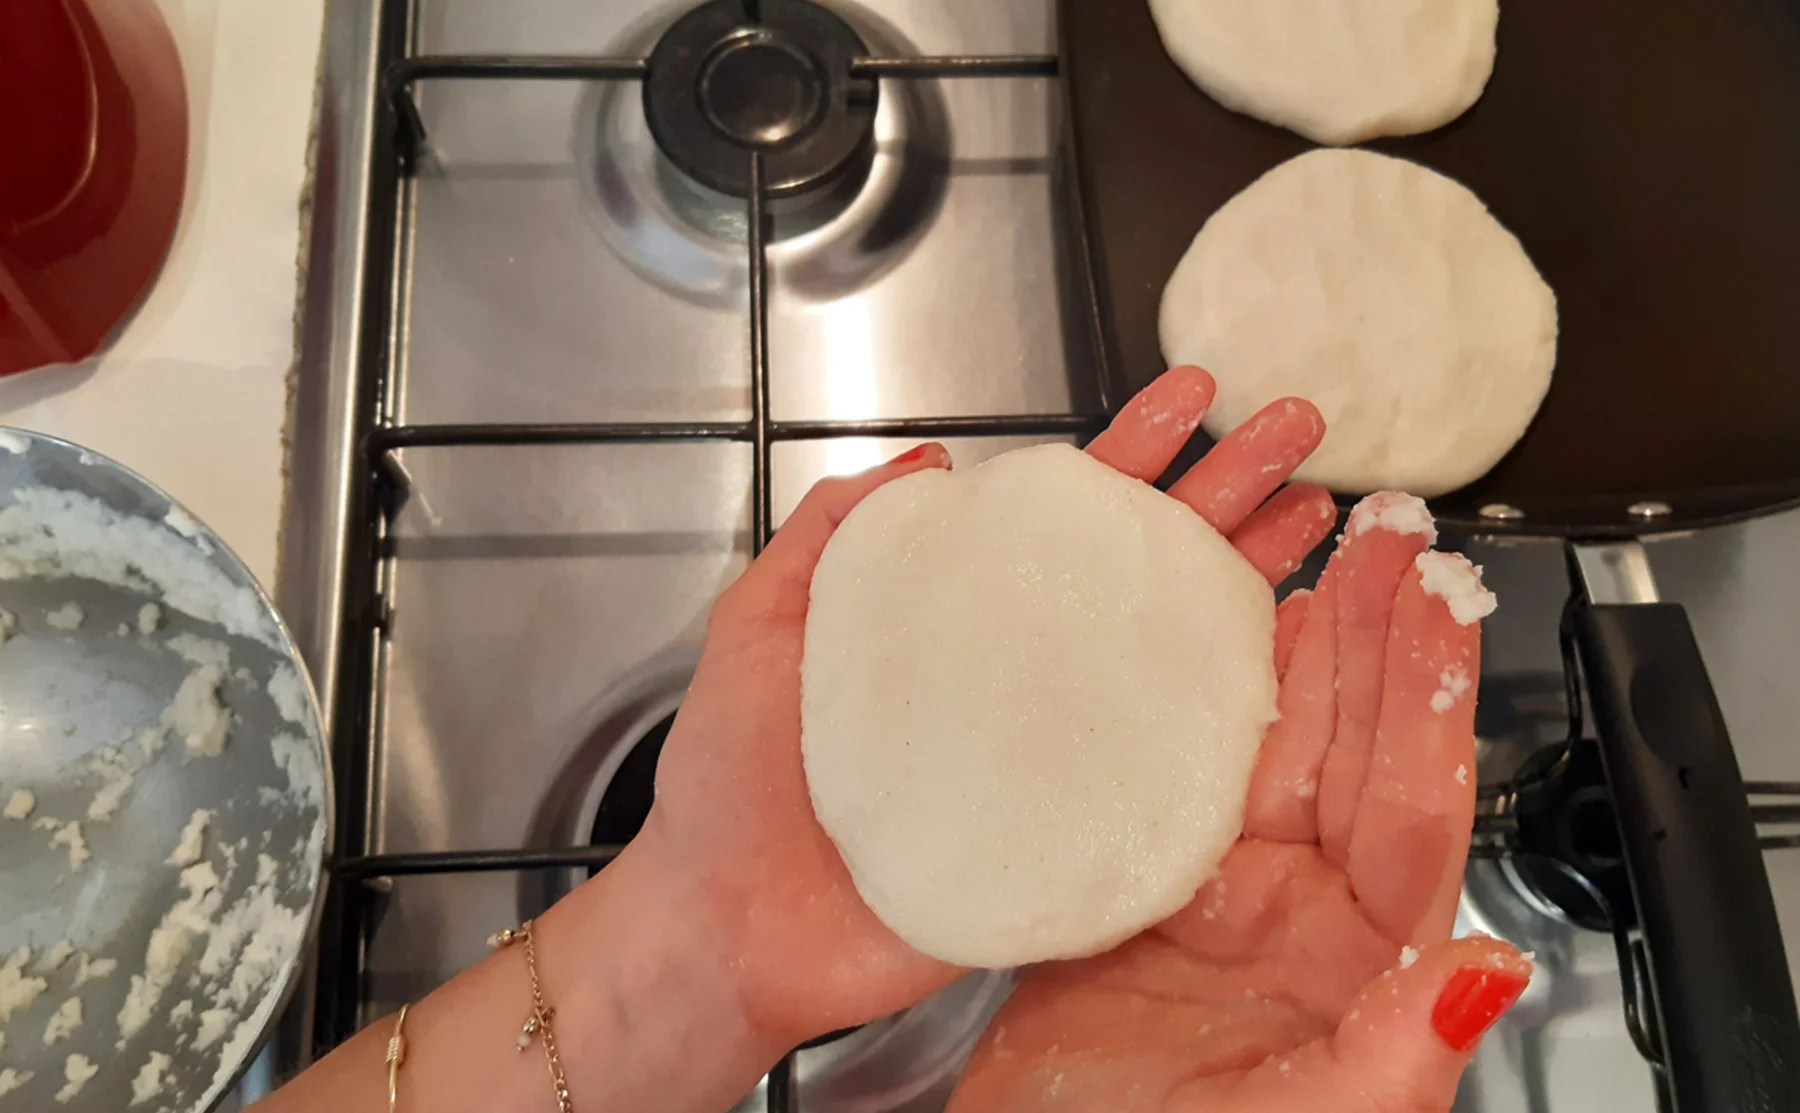 Learn to cook Arepas and enjoy a Venezuelan meal  - 1276177